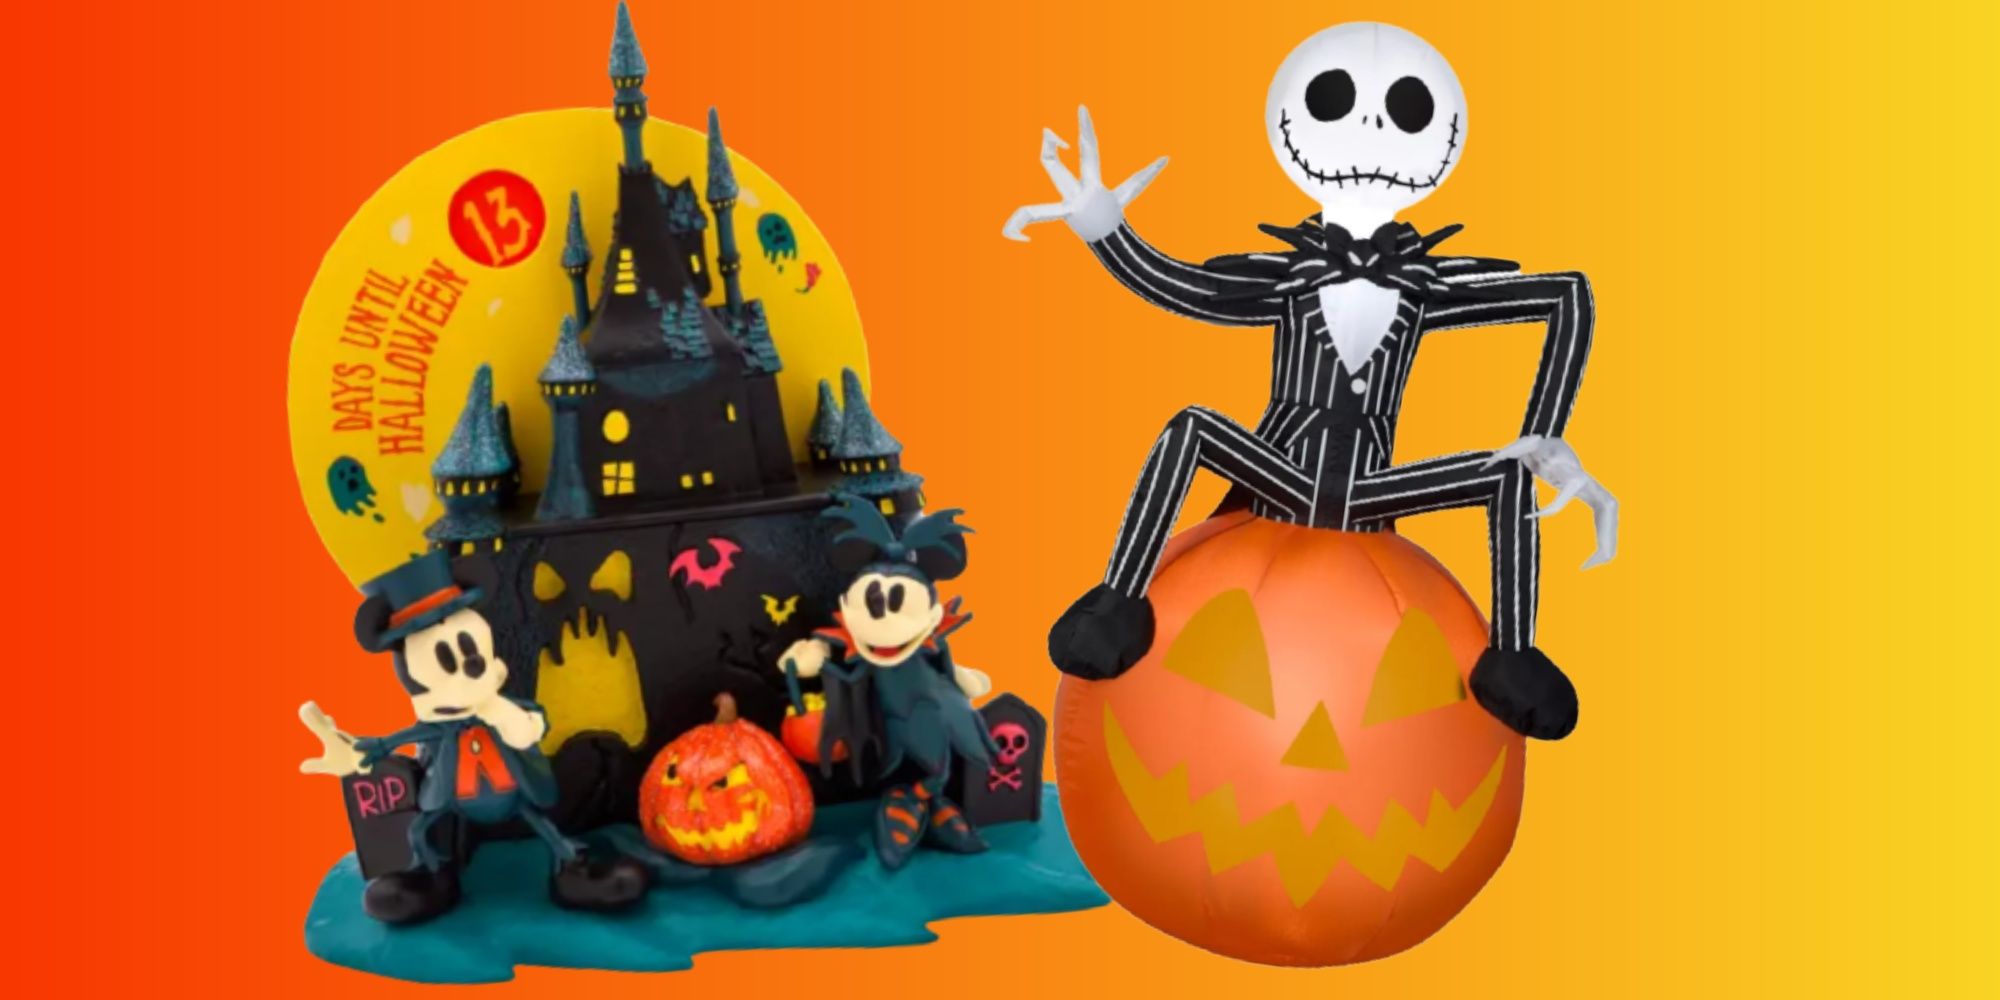 Mickey and Minnie Mouse Halloween decoration and Jack Skellingon inflatable on a orange and yellow background